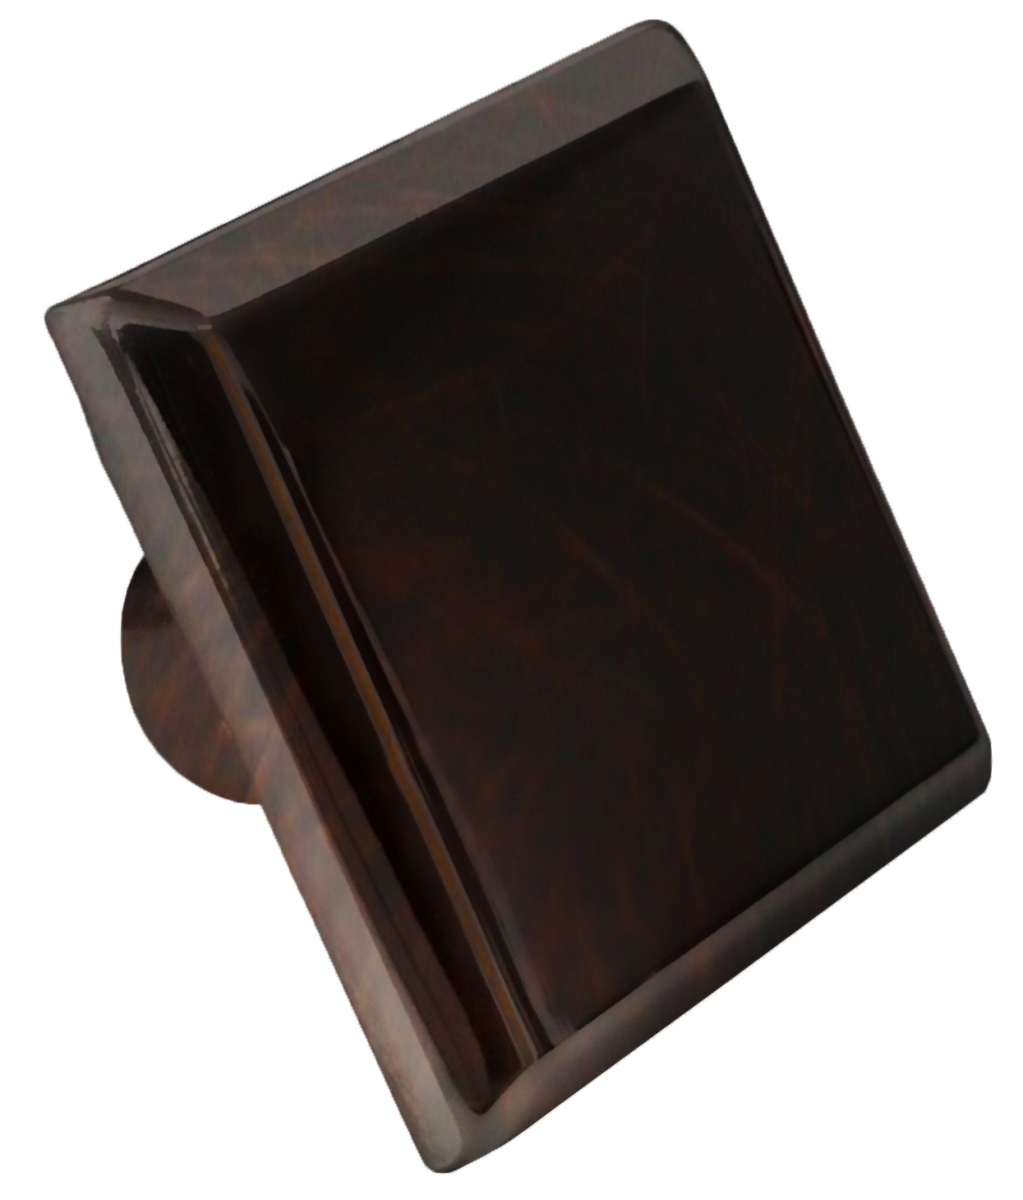 Ai-21407 1.2 In. Square Stainless Steel Cabinet Knob, Oil Rubbed Bronze